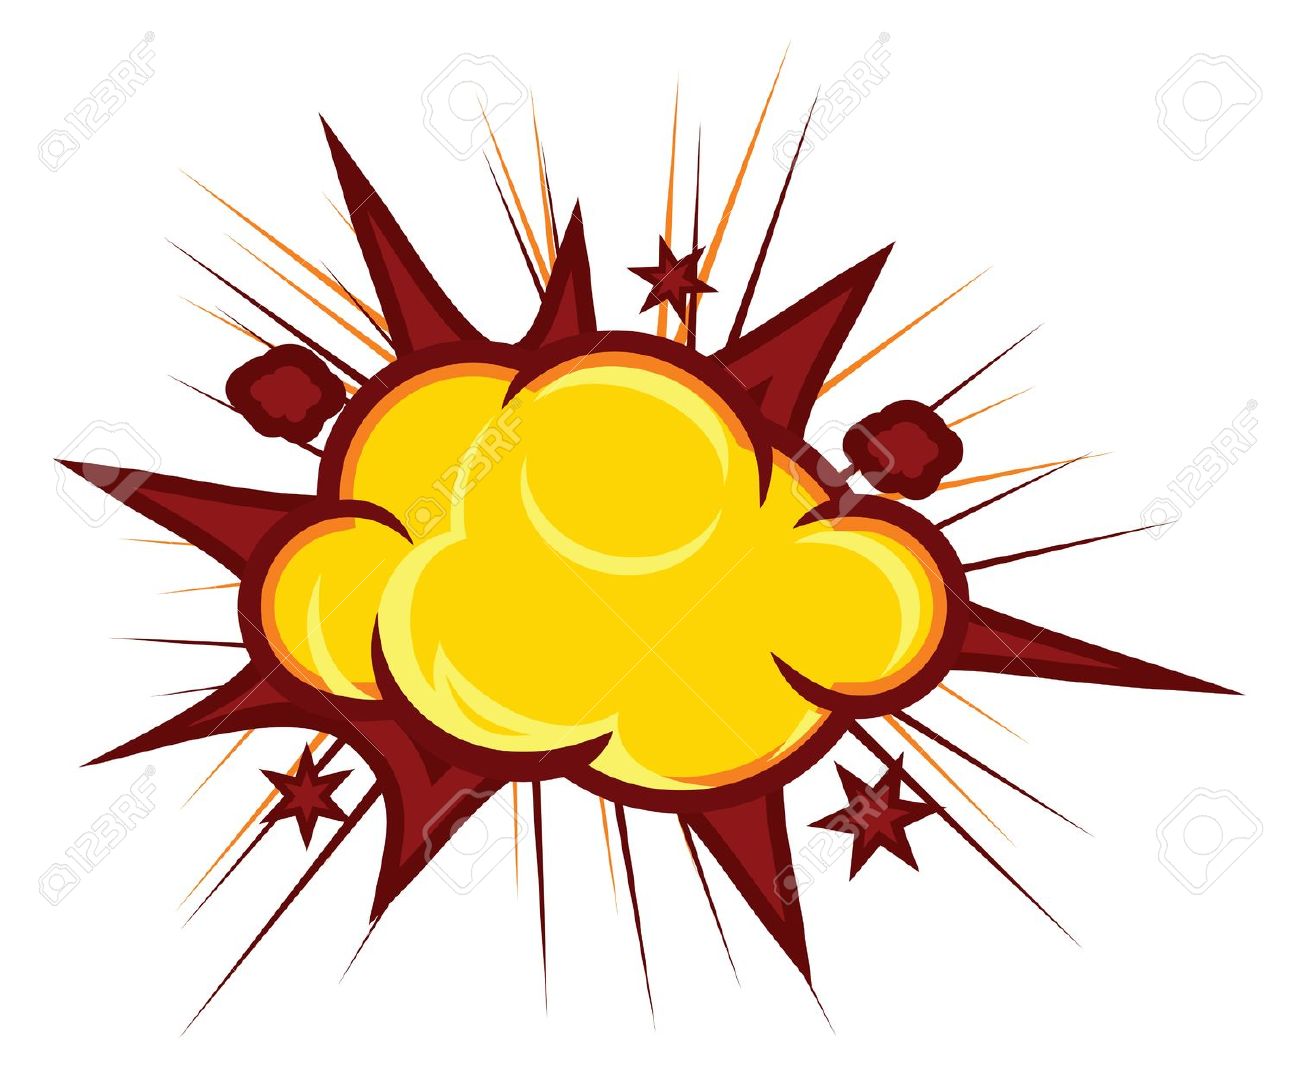 Bomb Explosion Cliparts Stock Vector And Royalty Free Bomb